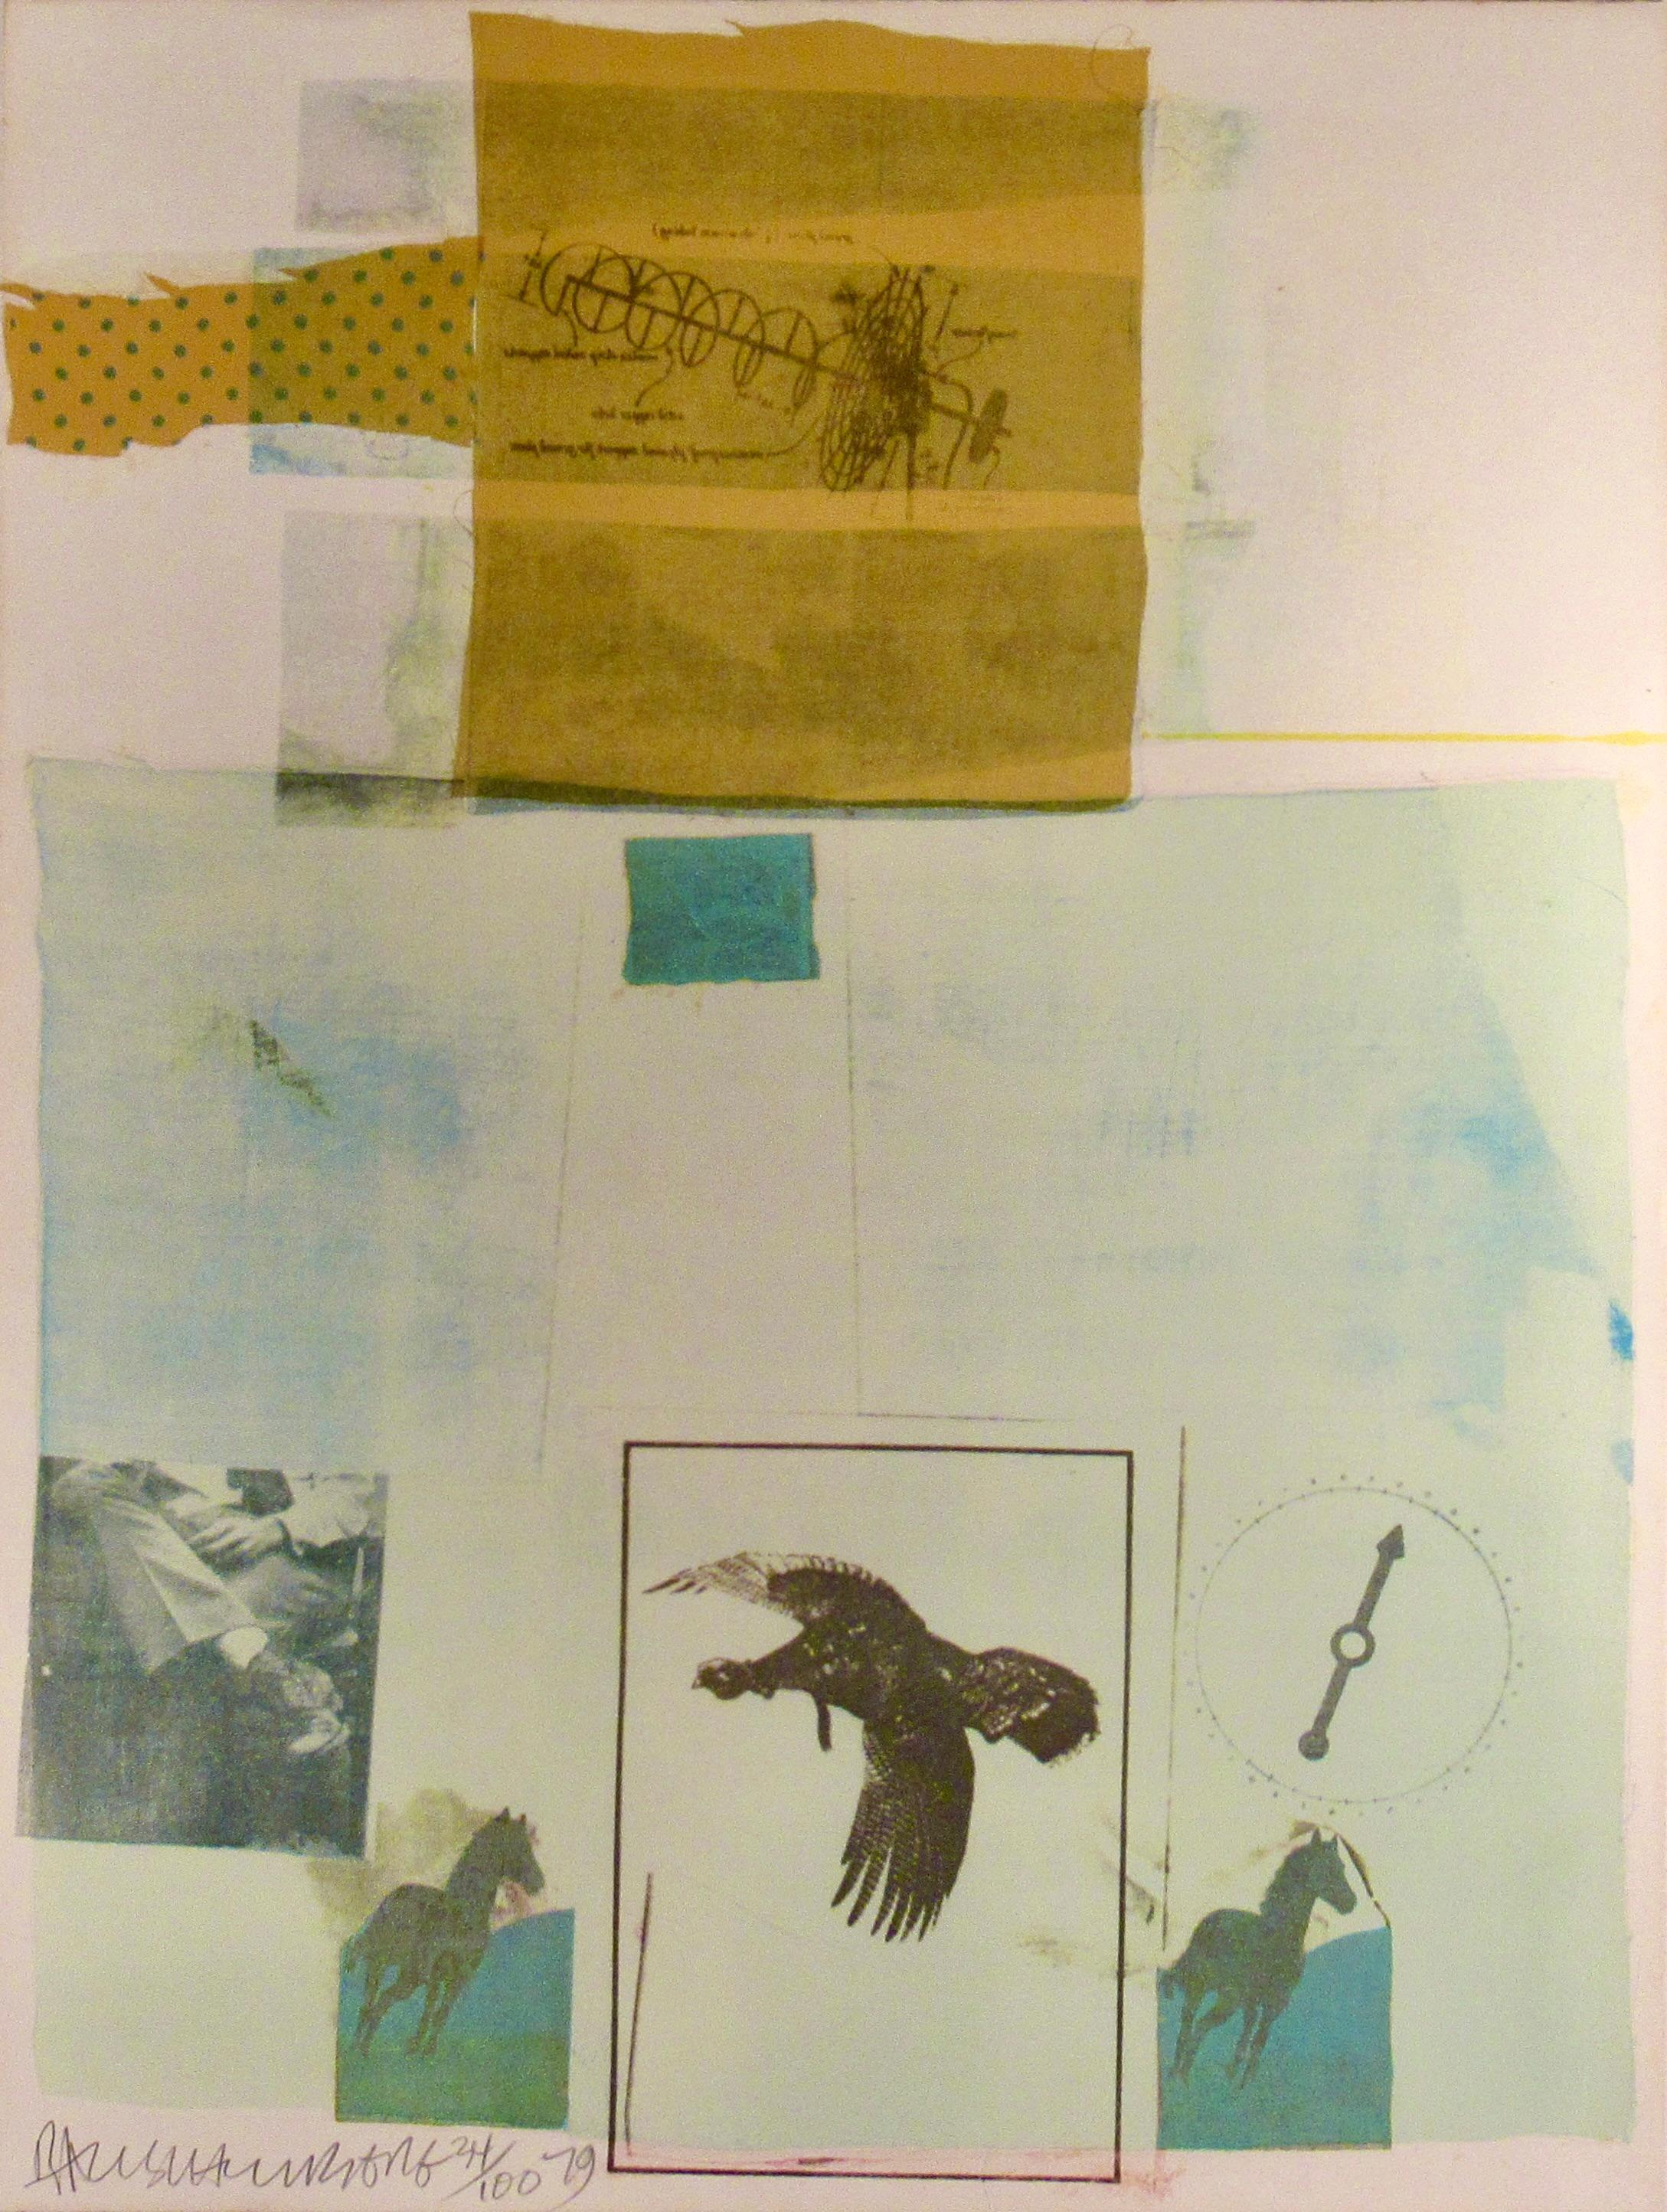 Why can't you tell - Print by Robert Rauschenberg